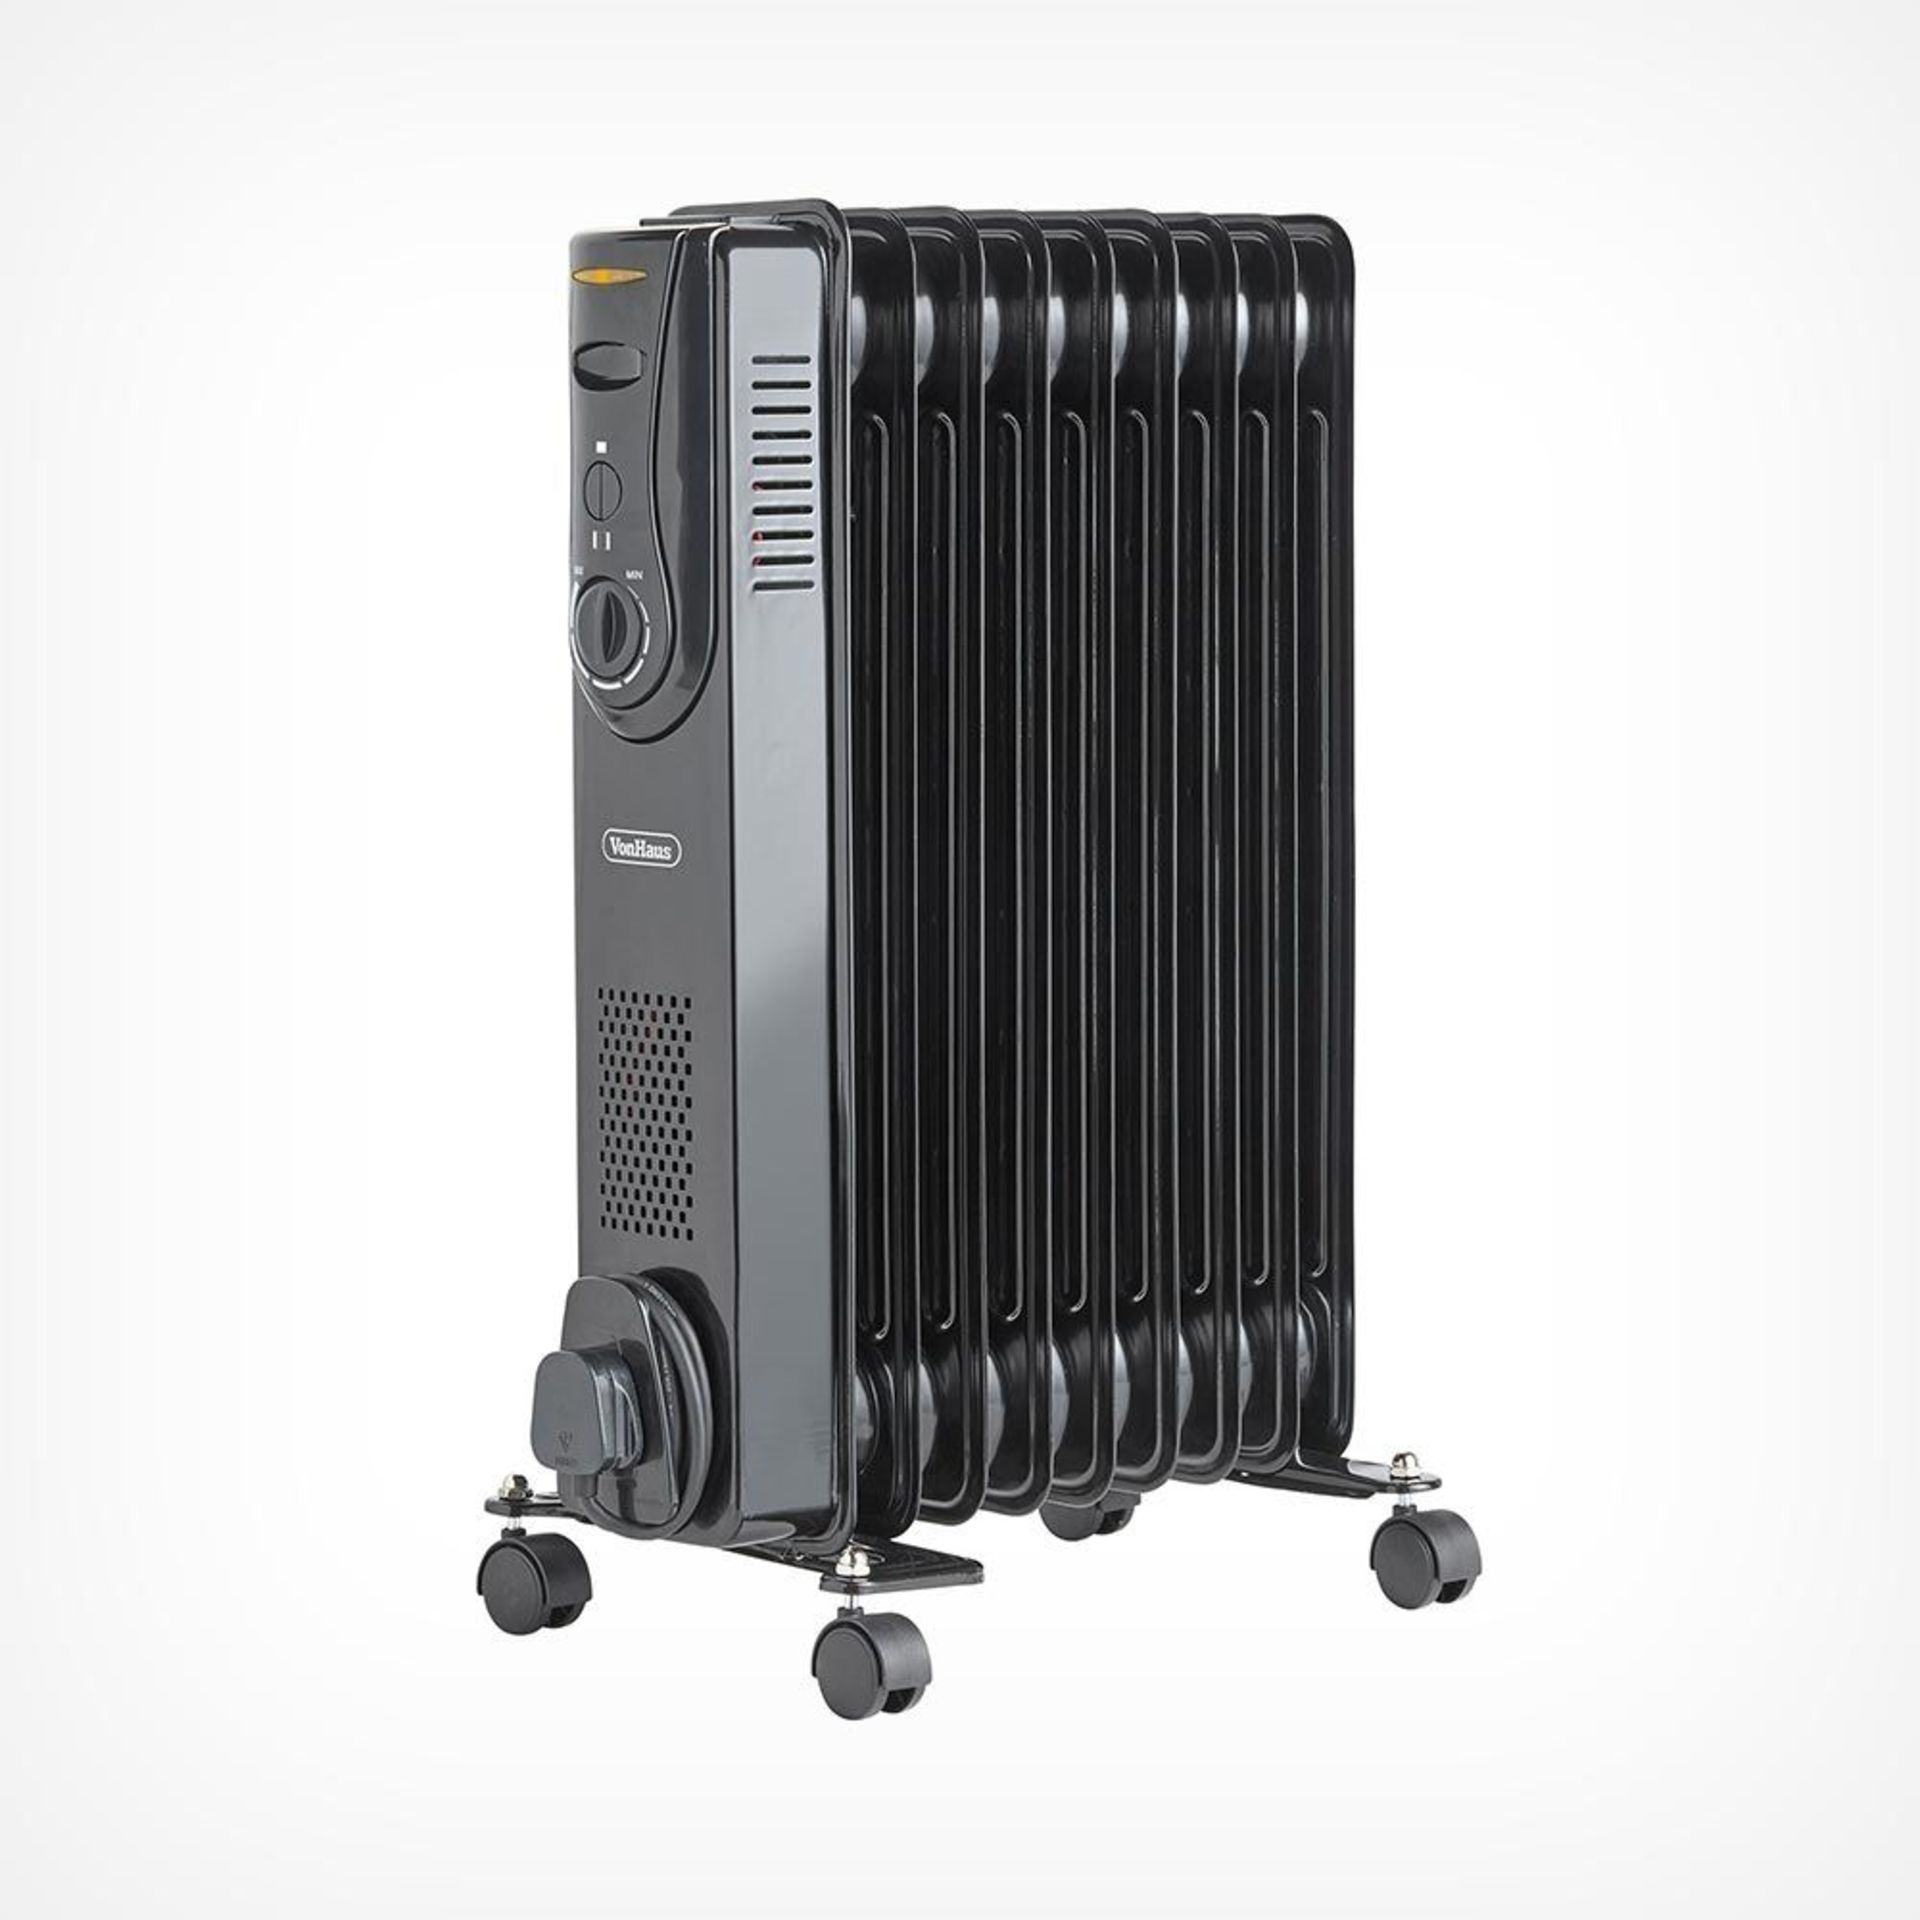 (CP114) 9 Fin 2000W Oil Filled Radiator - Black Powerful 2000W radiator with 9 oil-filled fins... - Image 2 of 5